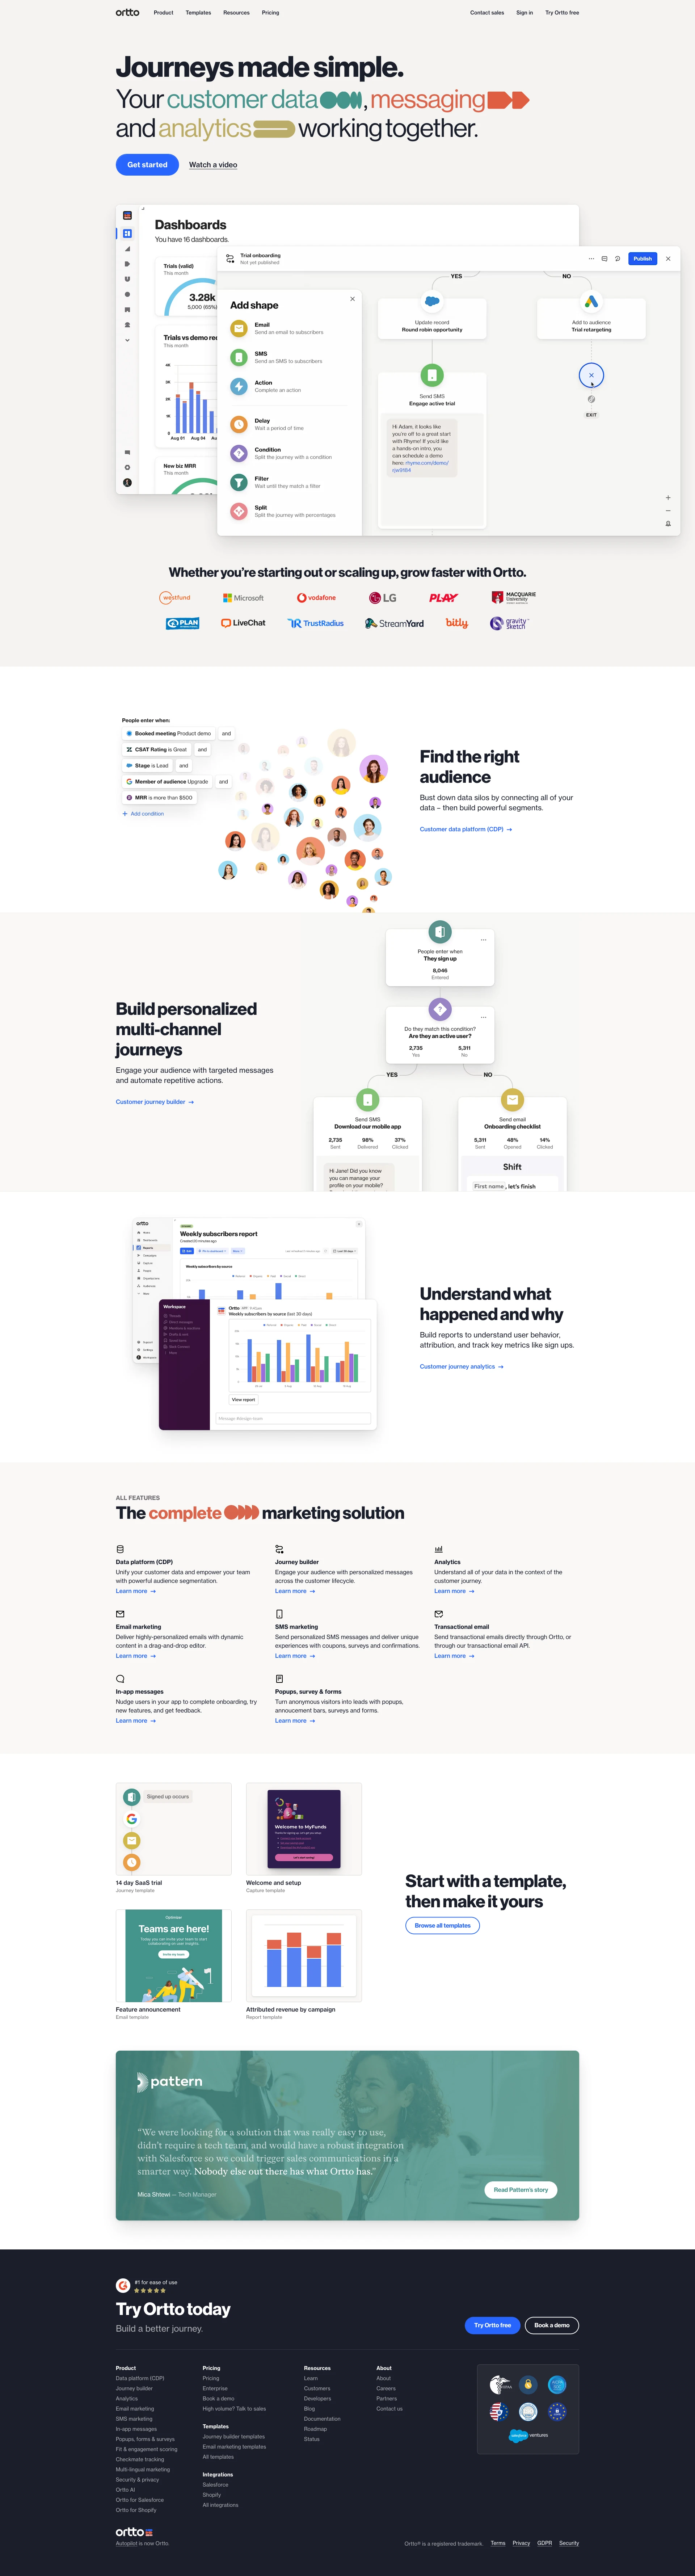 Ortto Landing Page Example: Journeys made simple. Unify your customer data, messaging and analytics on a single platform.